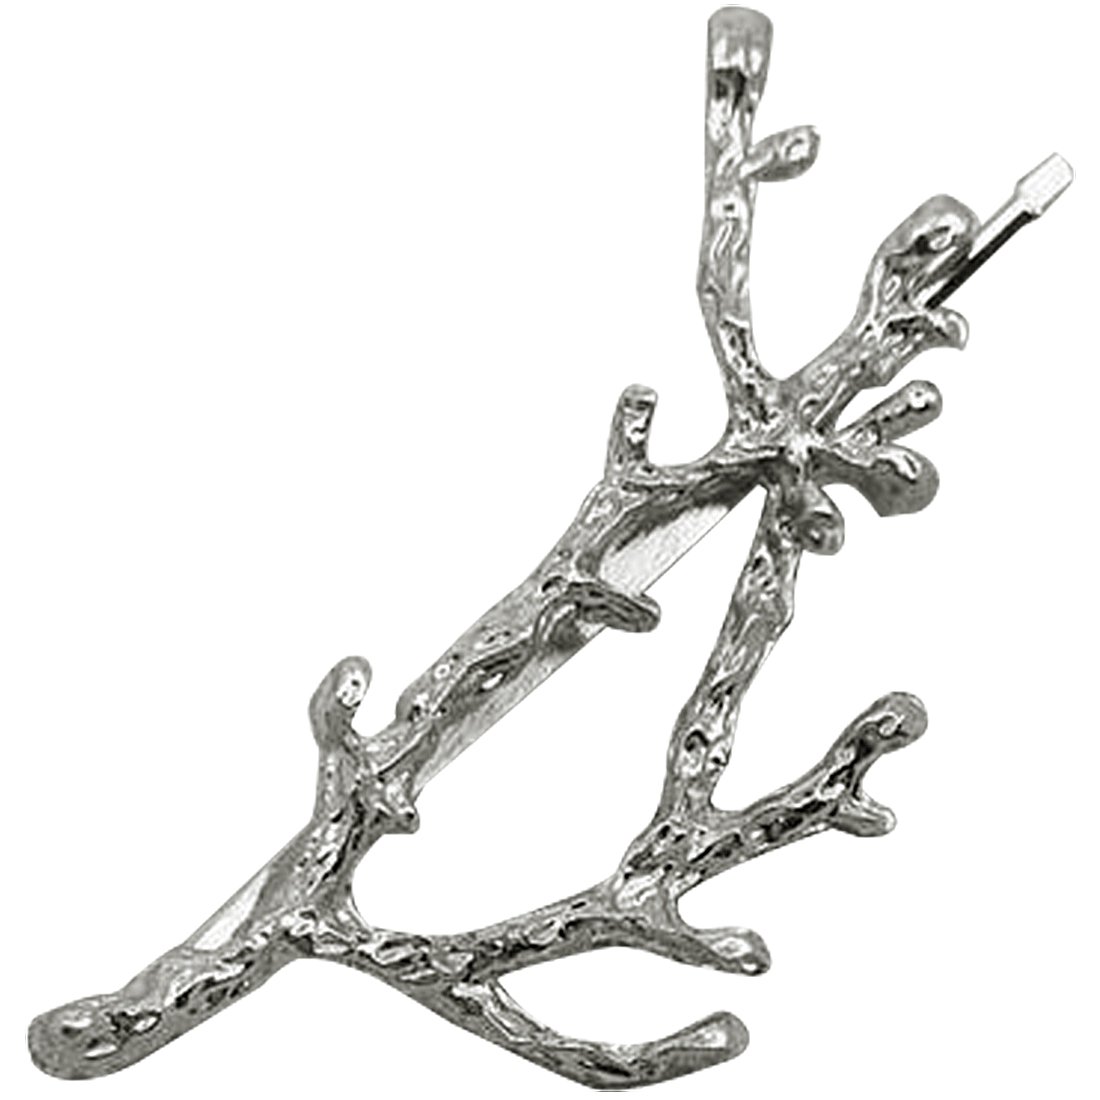 Vintage Style Tree Branch Hairpin - Floral Fawna